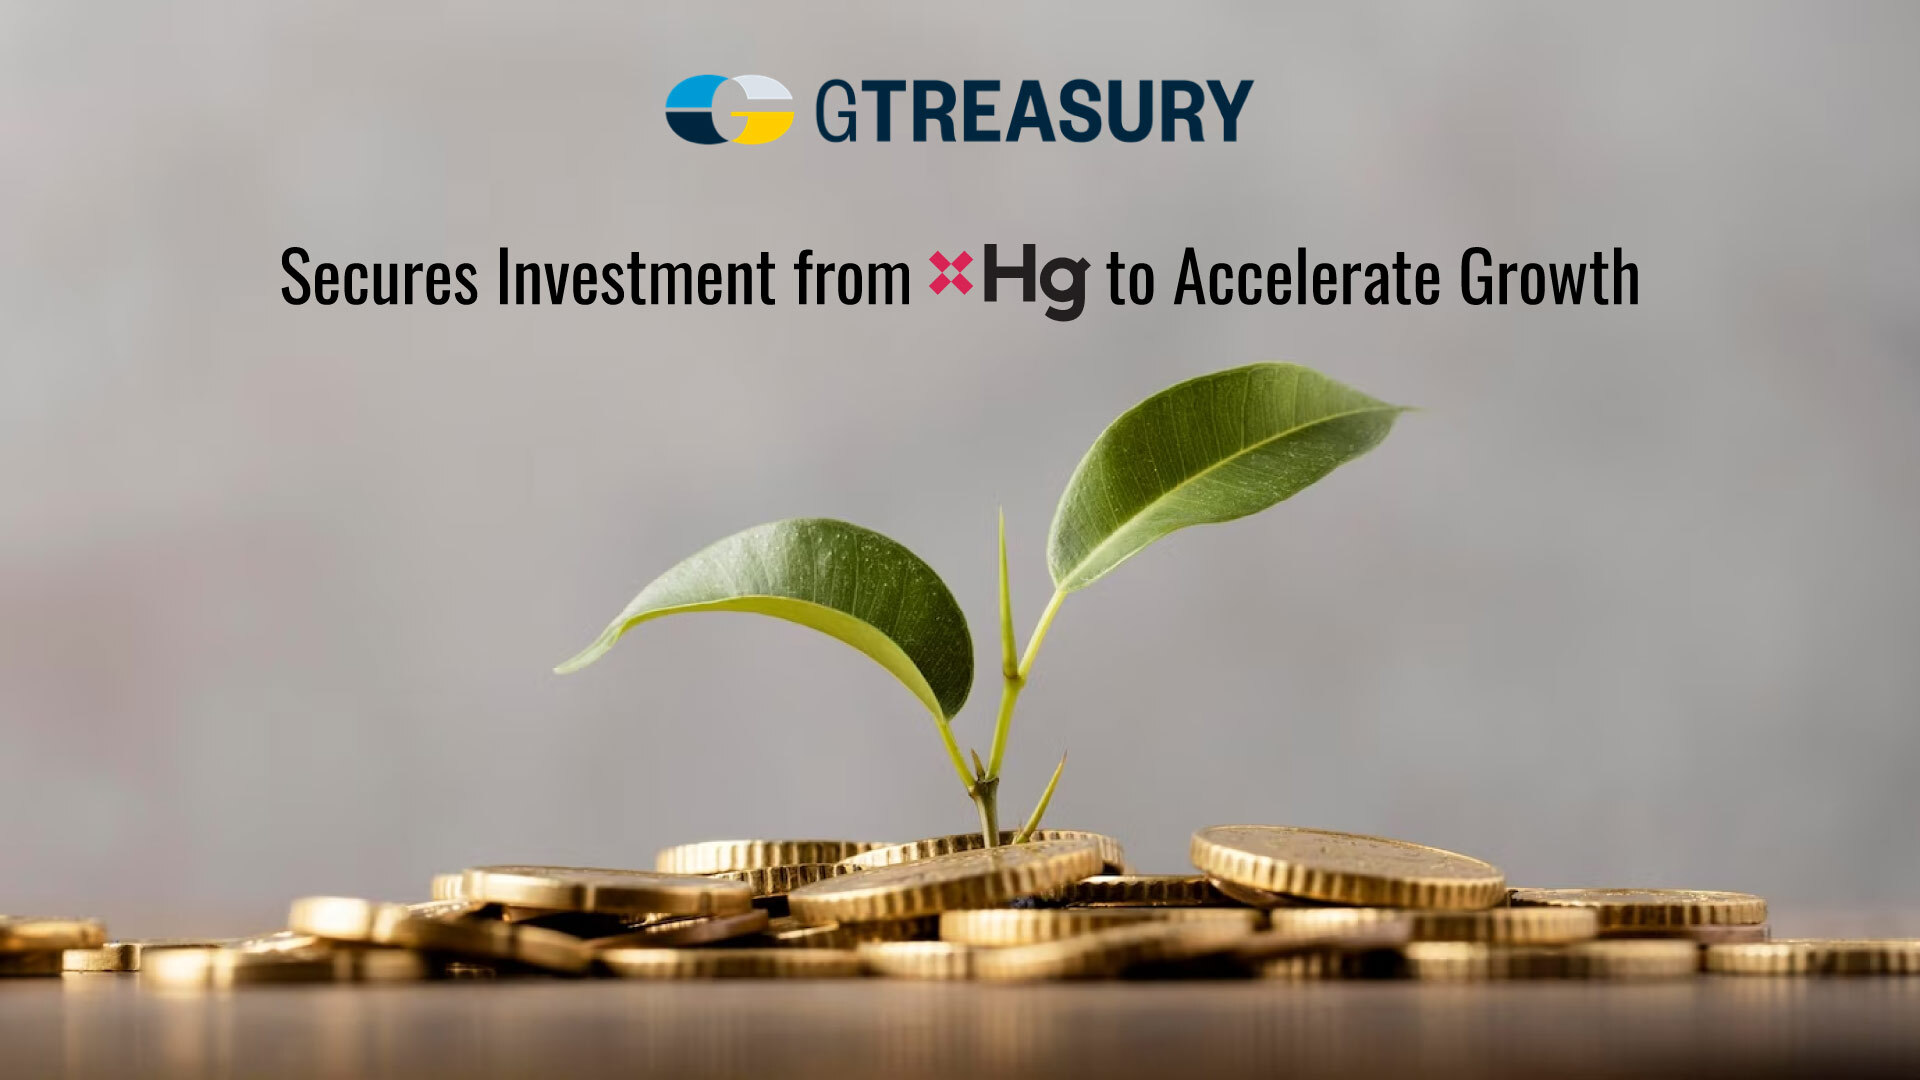 GTreasury Secures Investment from Hg to Accelerate Growth as a Global Treasury Management Software Platform